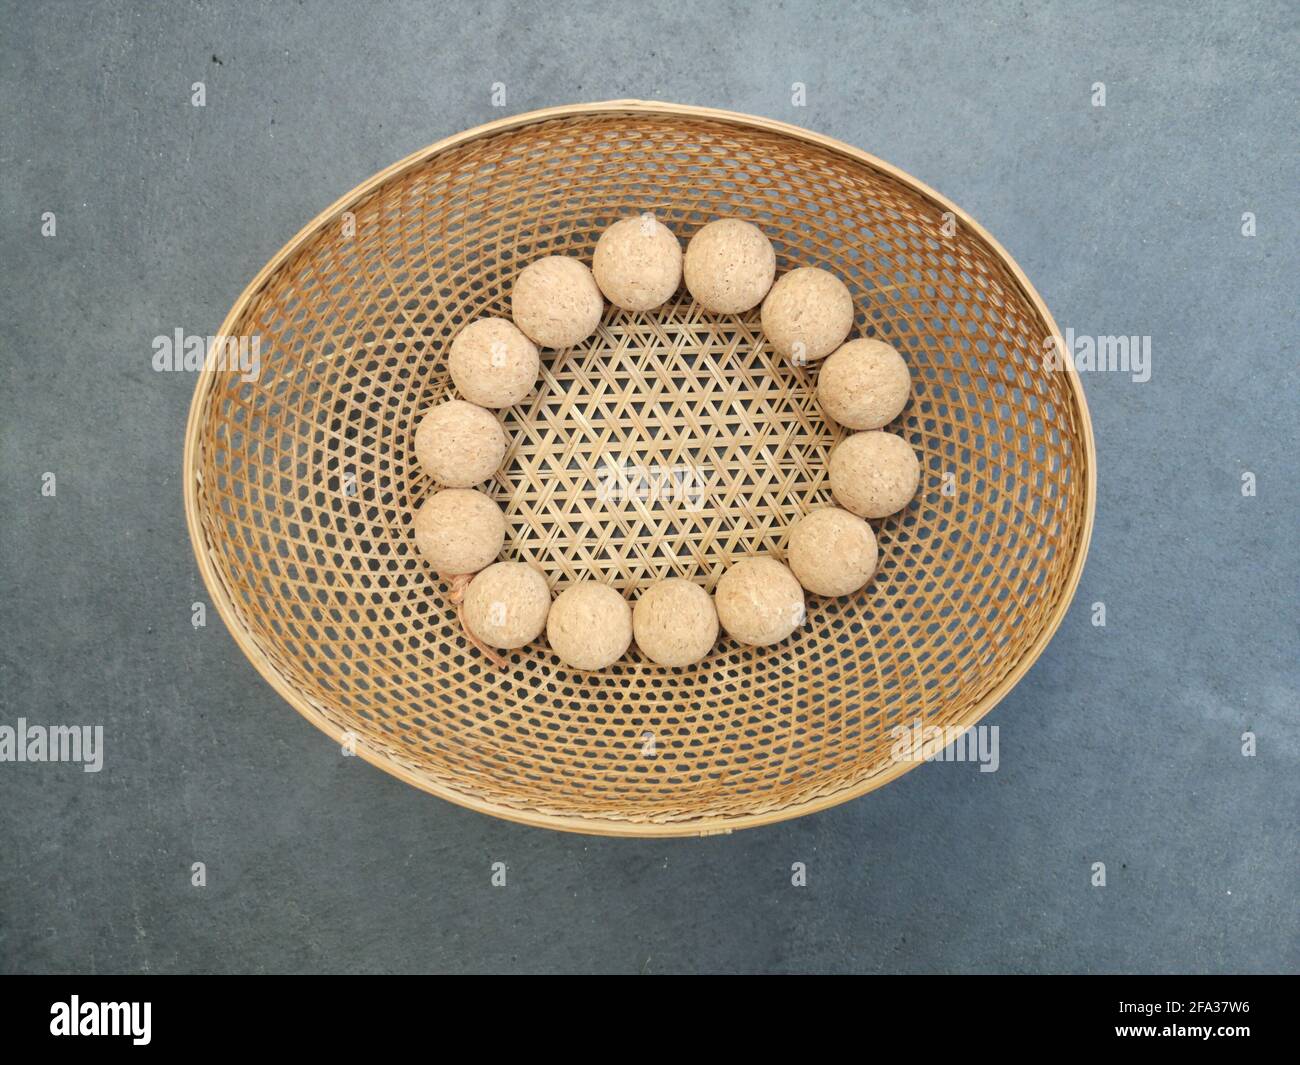 Top view of a thatch basket with small balls in it Stock Photo